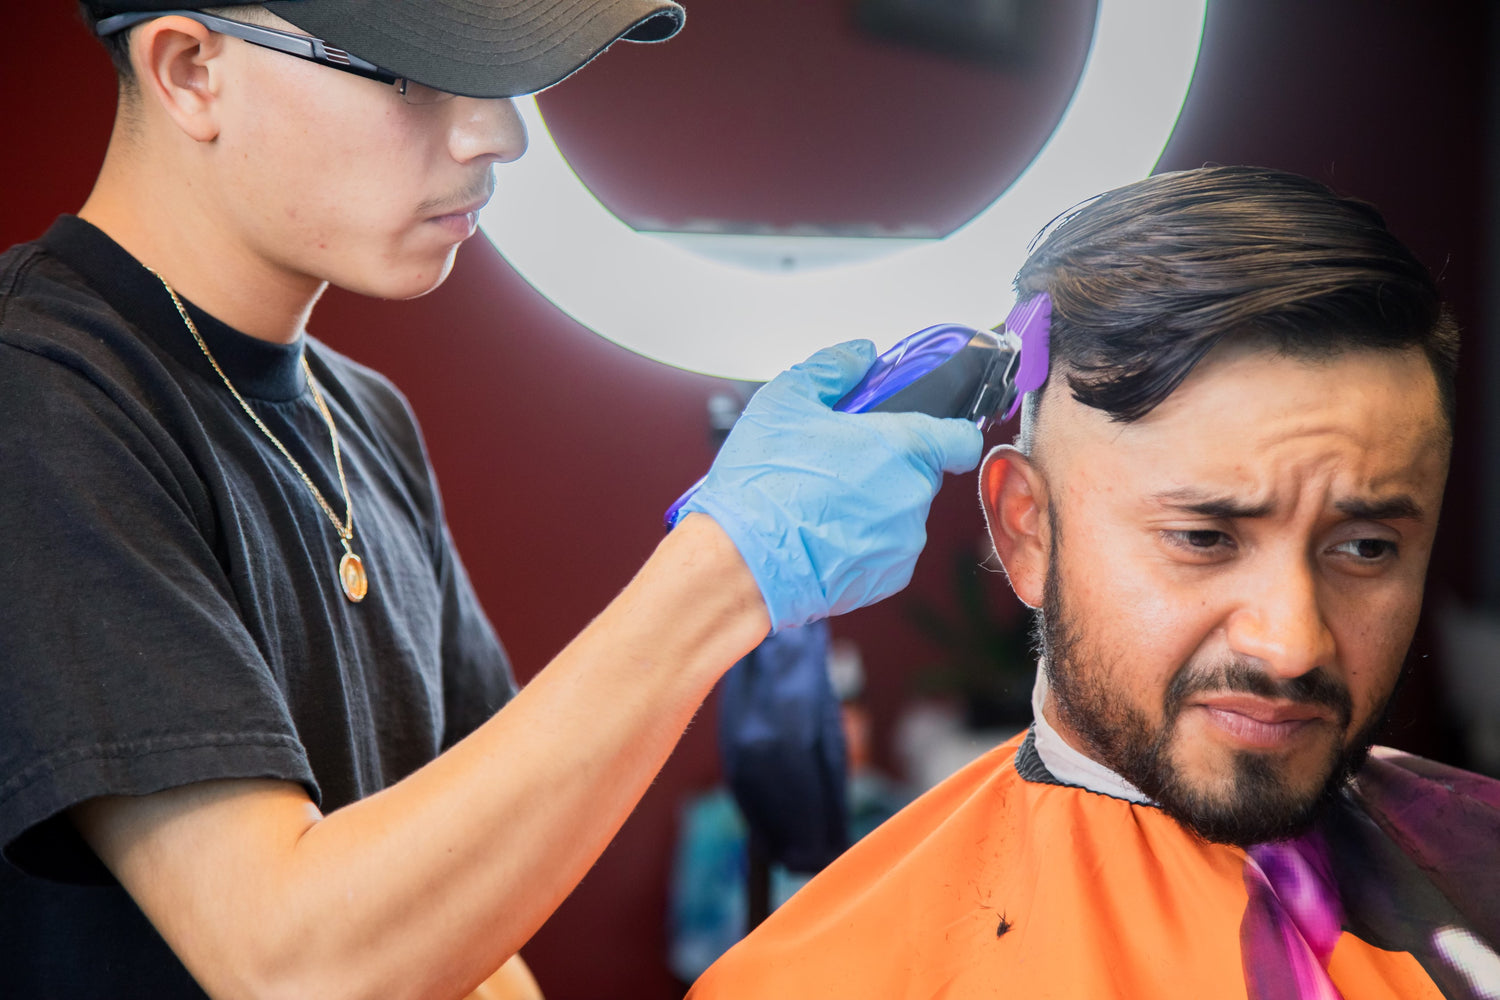 Barber with a black hat and shirt giving a client with an orange apron a haircut